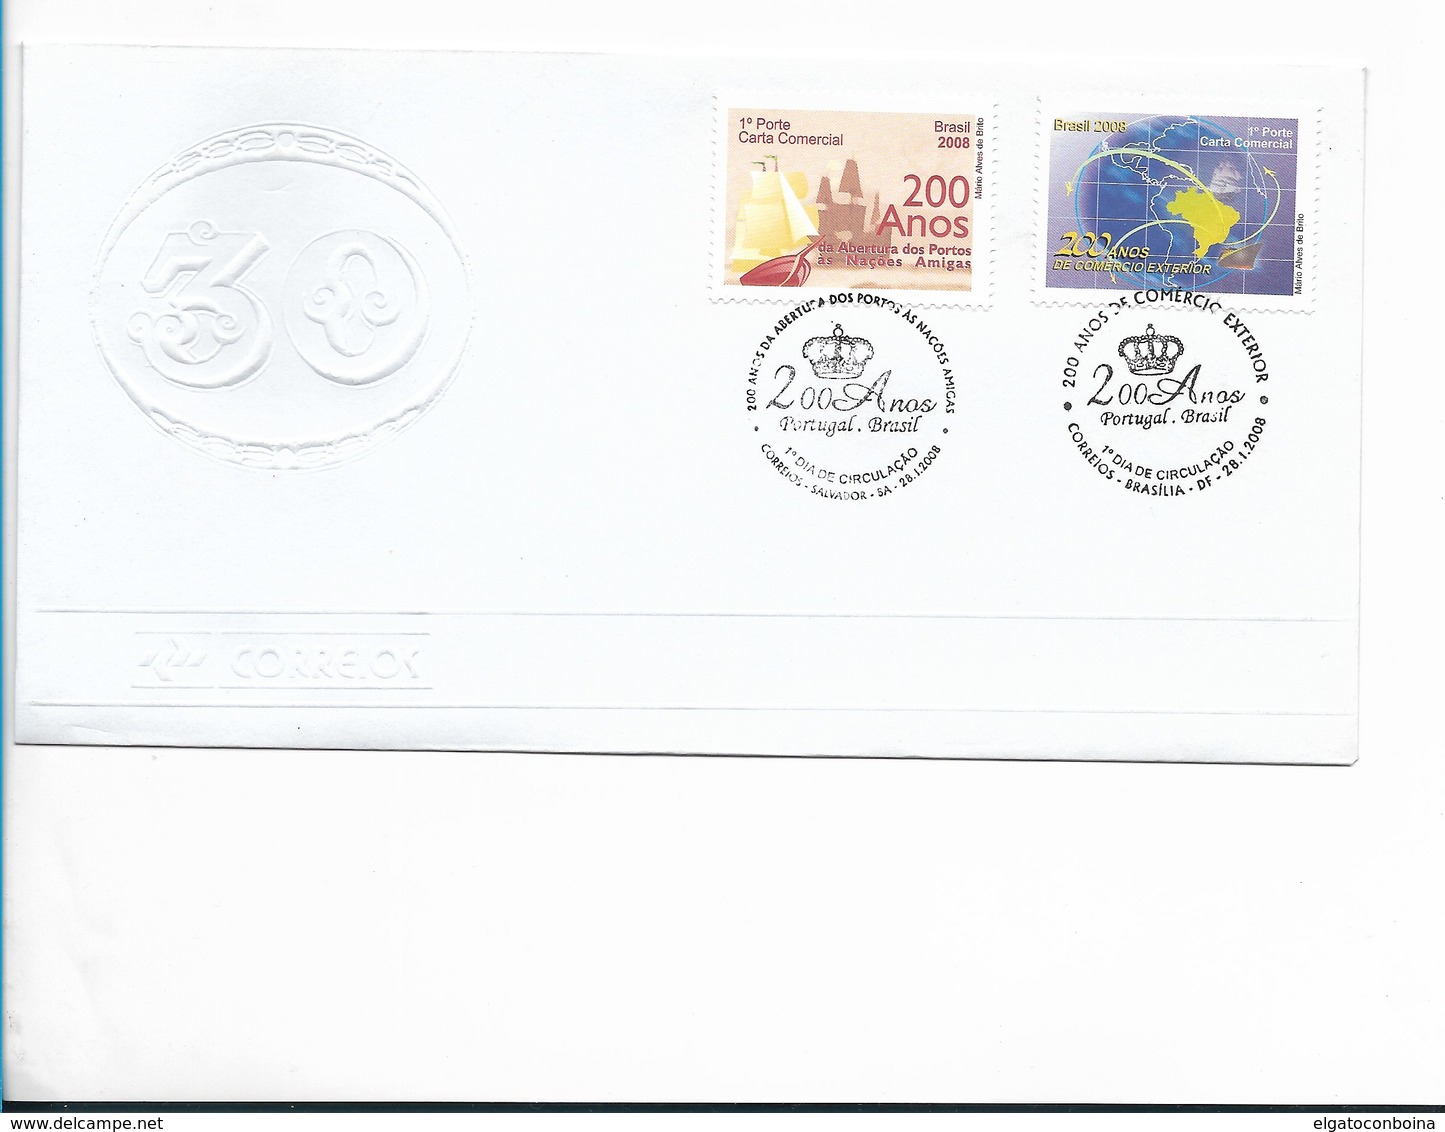 BRAZIL 2008 FDC OPENING OF THE PORTS, COMMERCE, CARTA COMERCIAL, 2 VALUES FIRST DAY COVER SPD SCOTT 3034 - Neufs